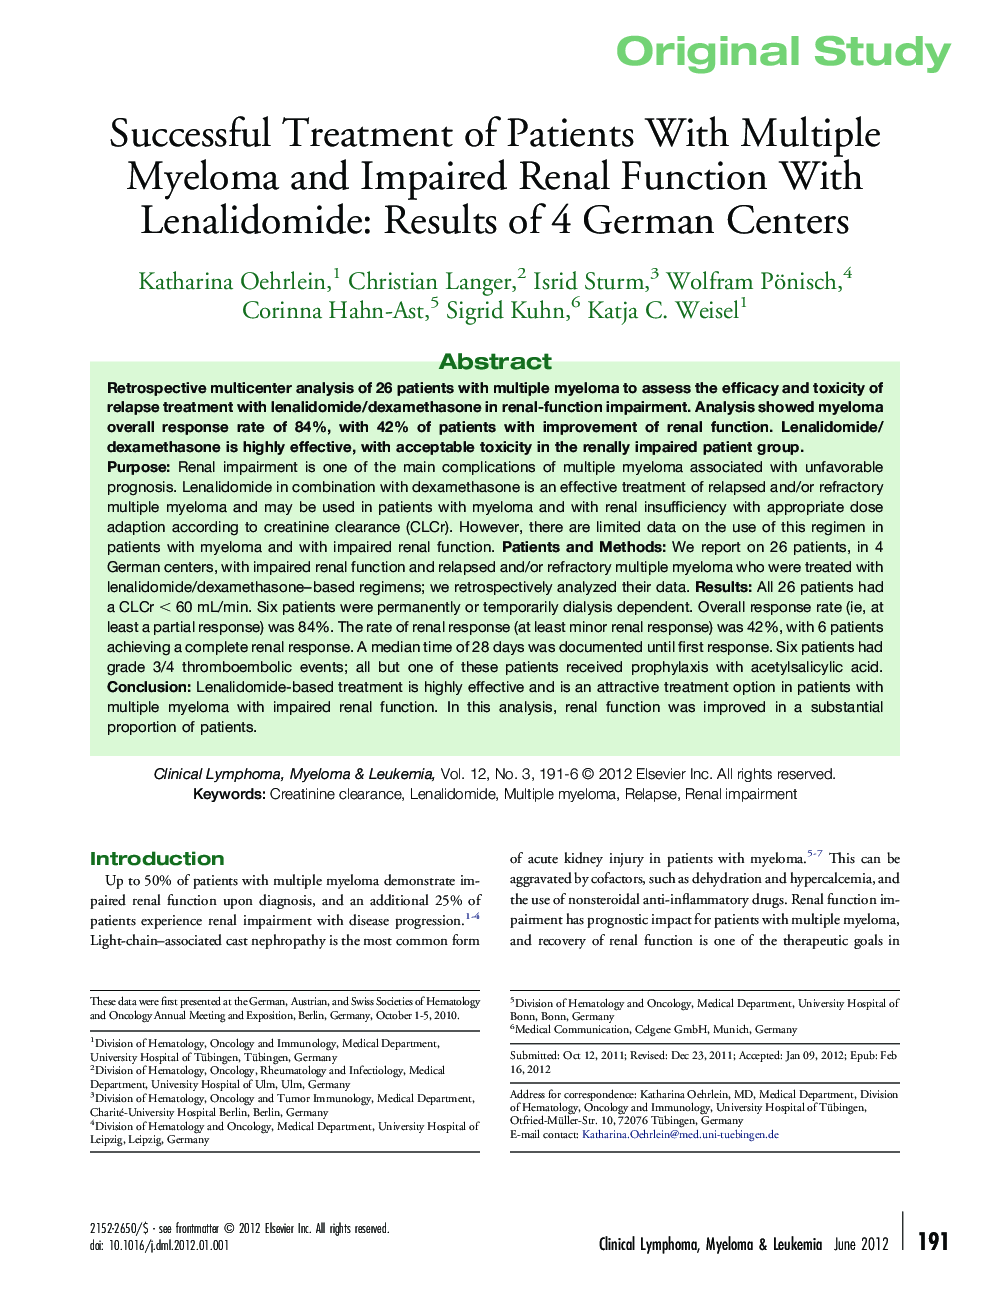 Successful Treatment of Patients With Multiple Myeloma and Impaired Renal Function With Lenalidomide: Results of 4 German Centers